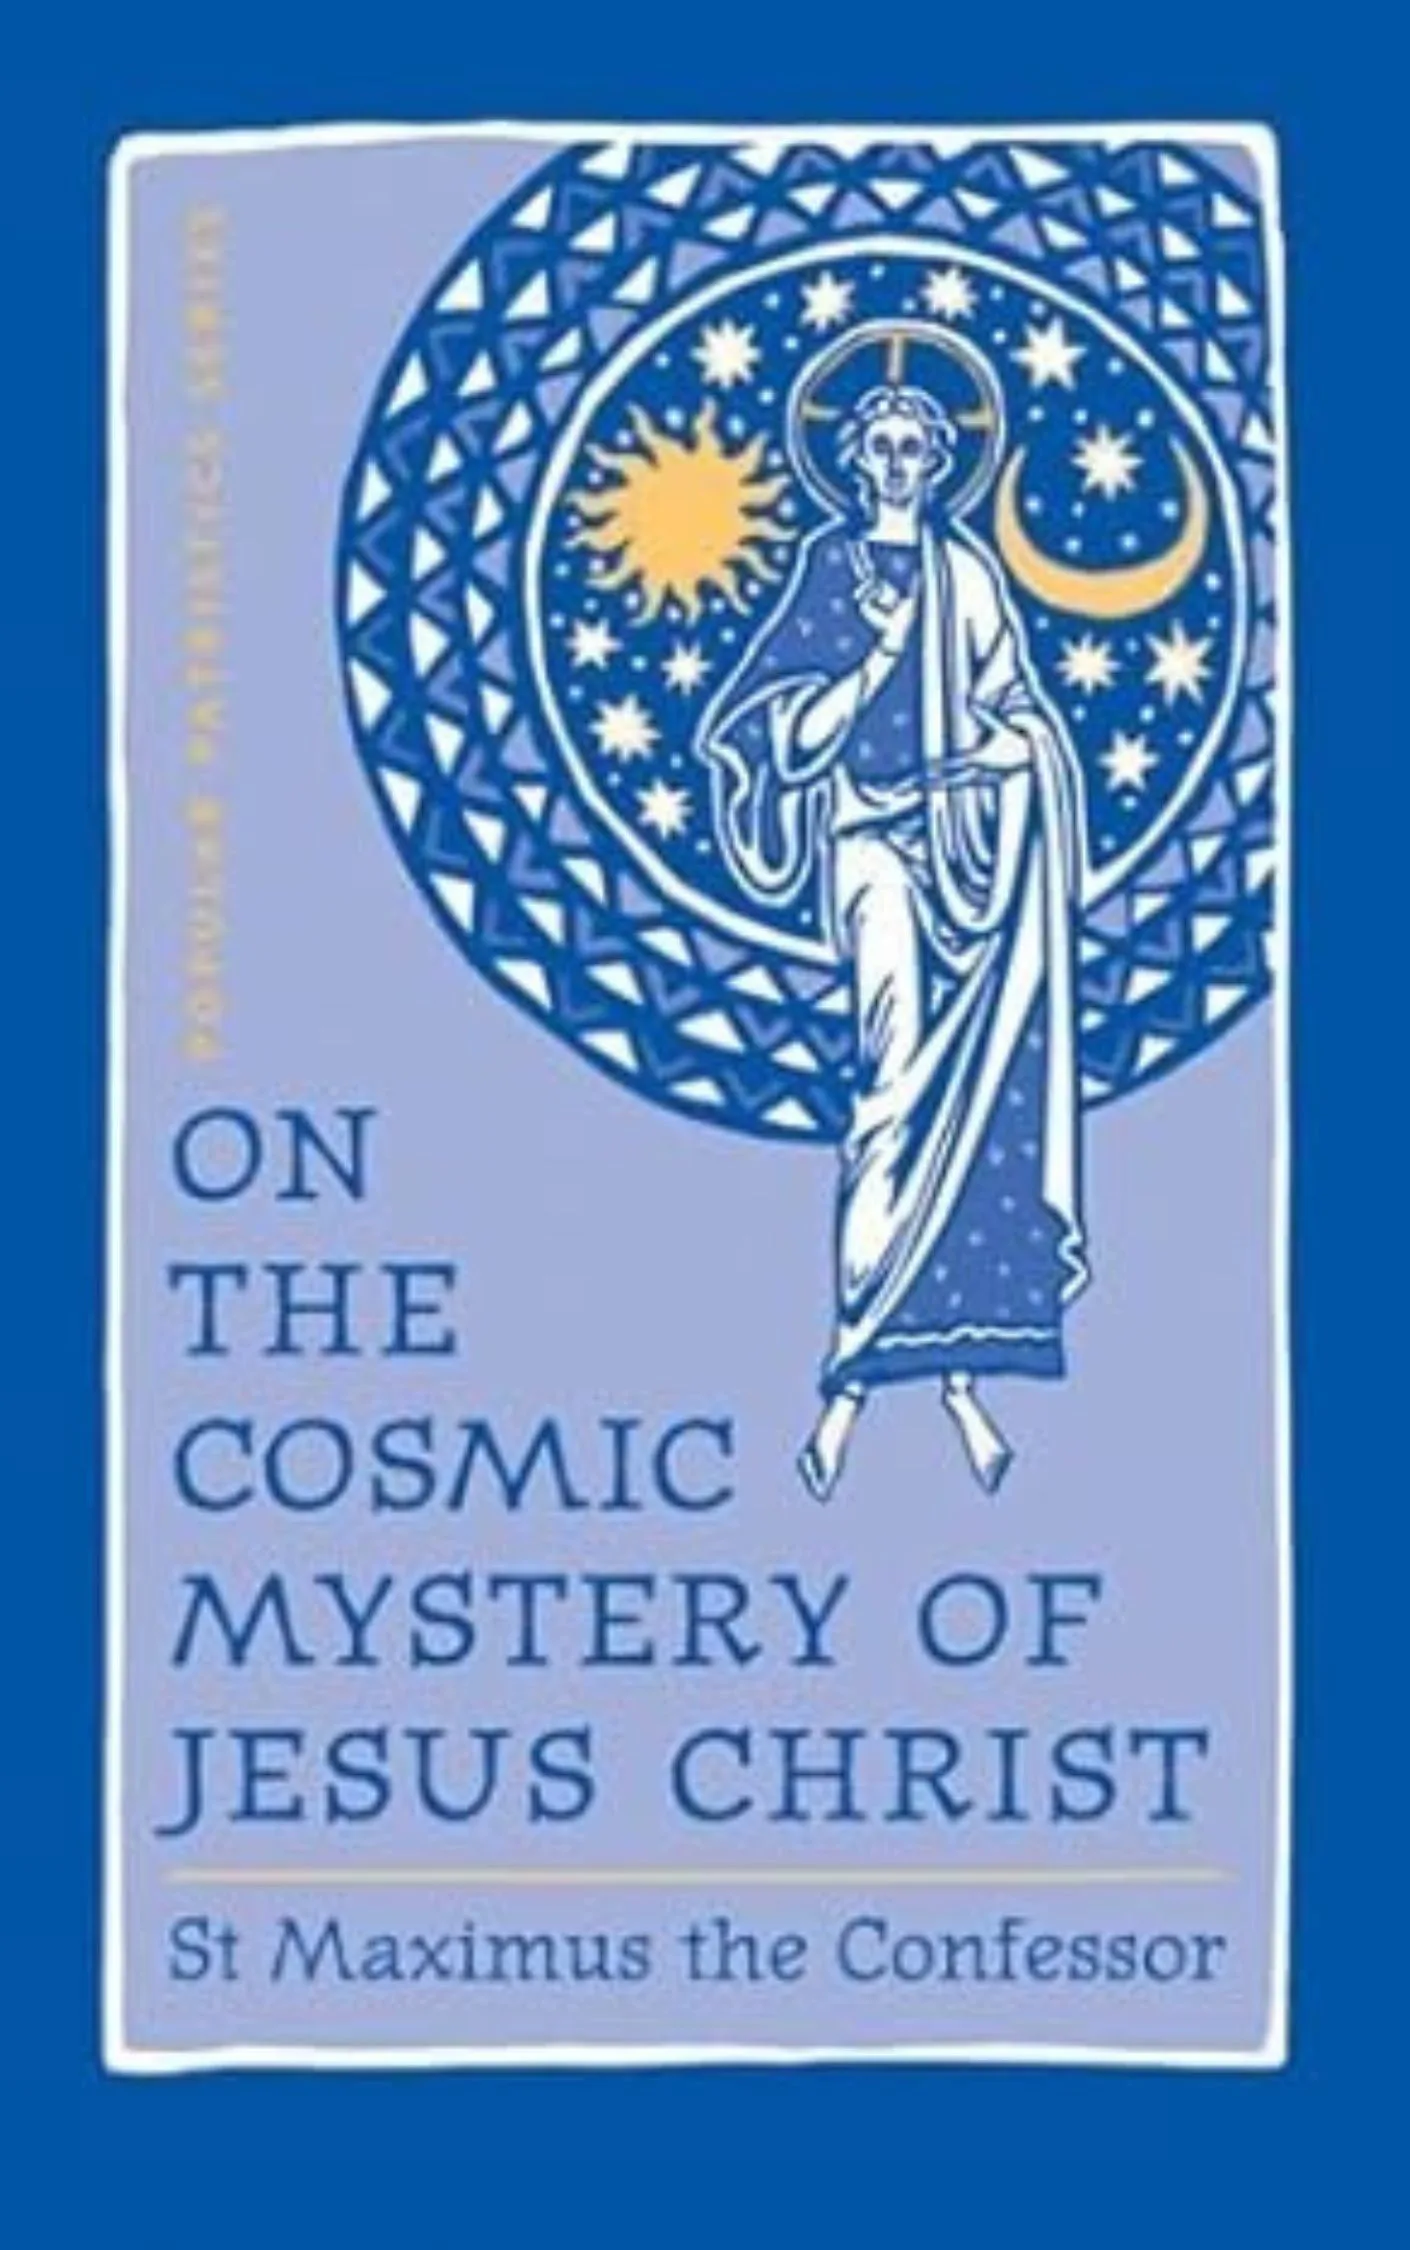 On the Cosmic Mystery of Jesus Christ by St Maximus the Confessor